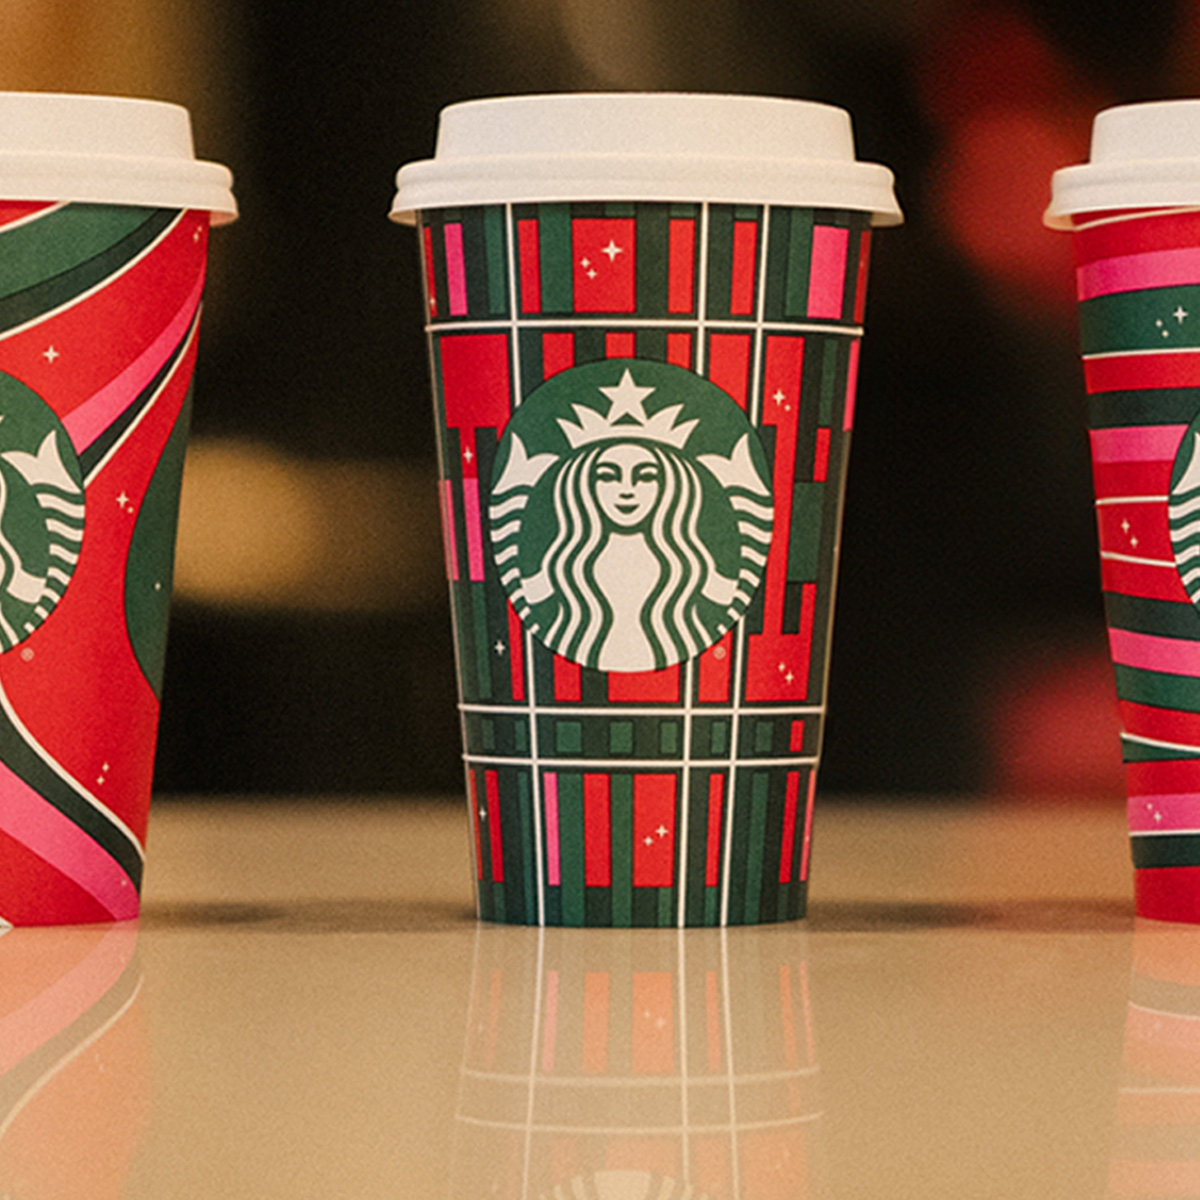 https://akns-images.eonline.com/eol_images/Entire_Site/2023101/rs_1200x1200-231101091835-1200.starbucks-holiday-cups-2023-tb-110123.jpg?fit=around%7C1200:1200&output-quality=90&crop=1200:1200;center,top